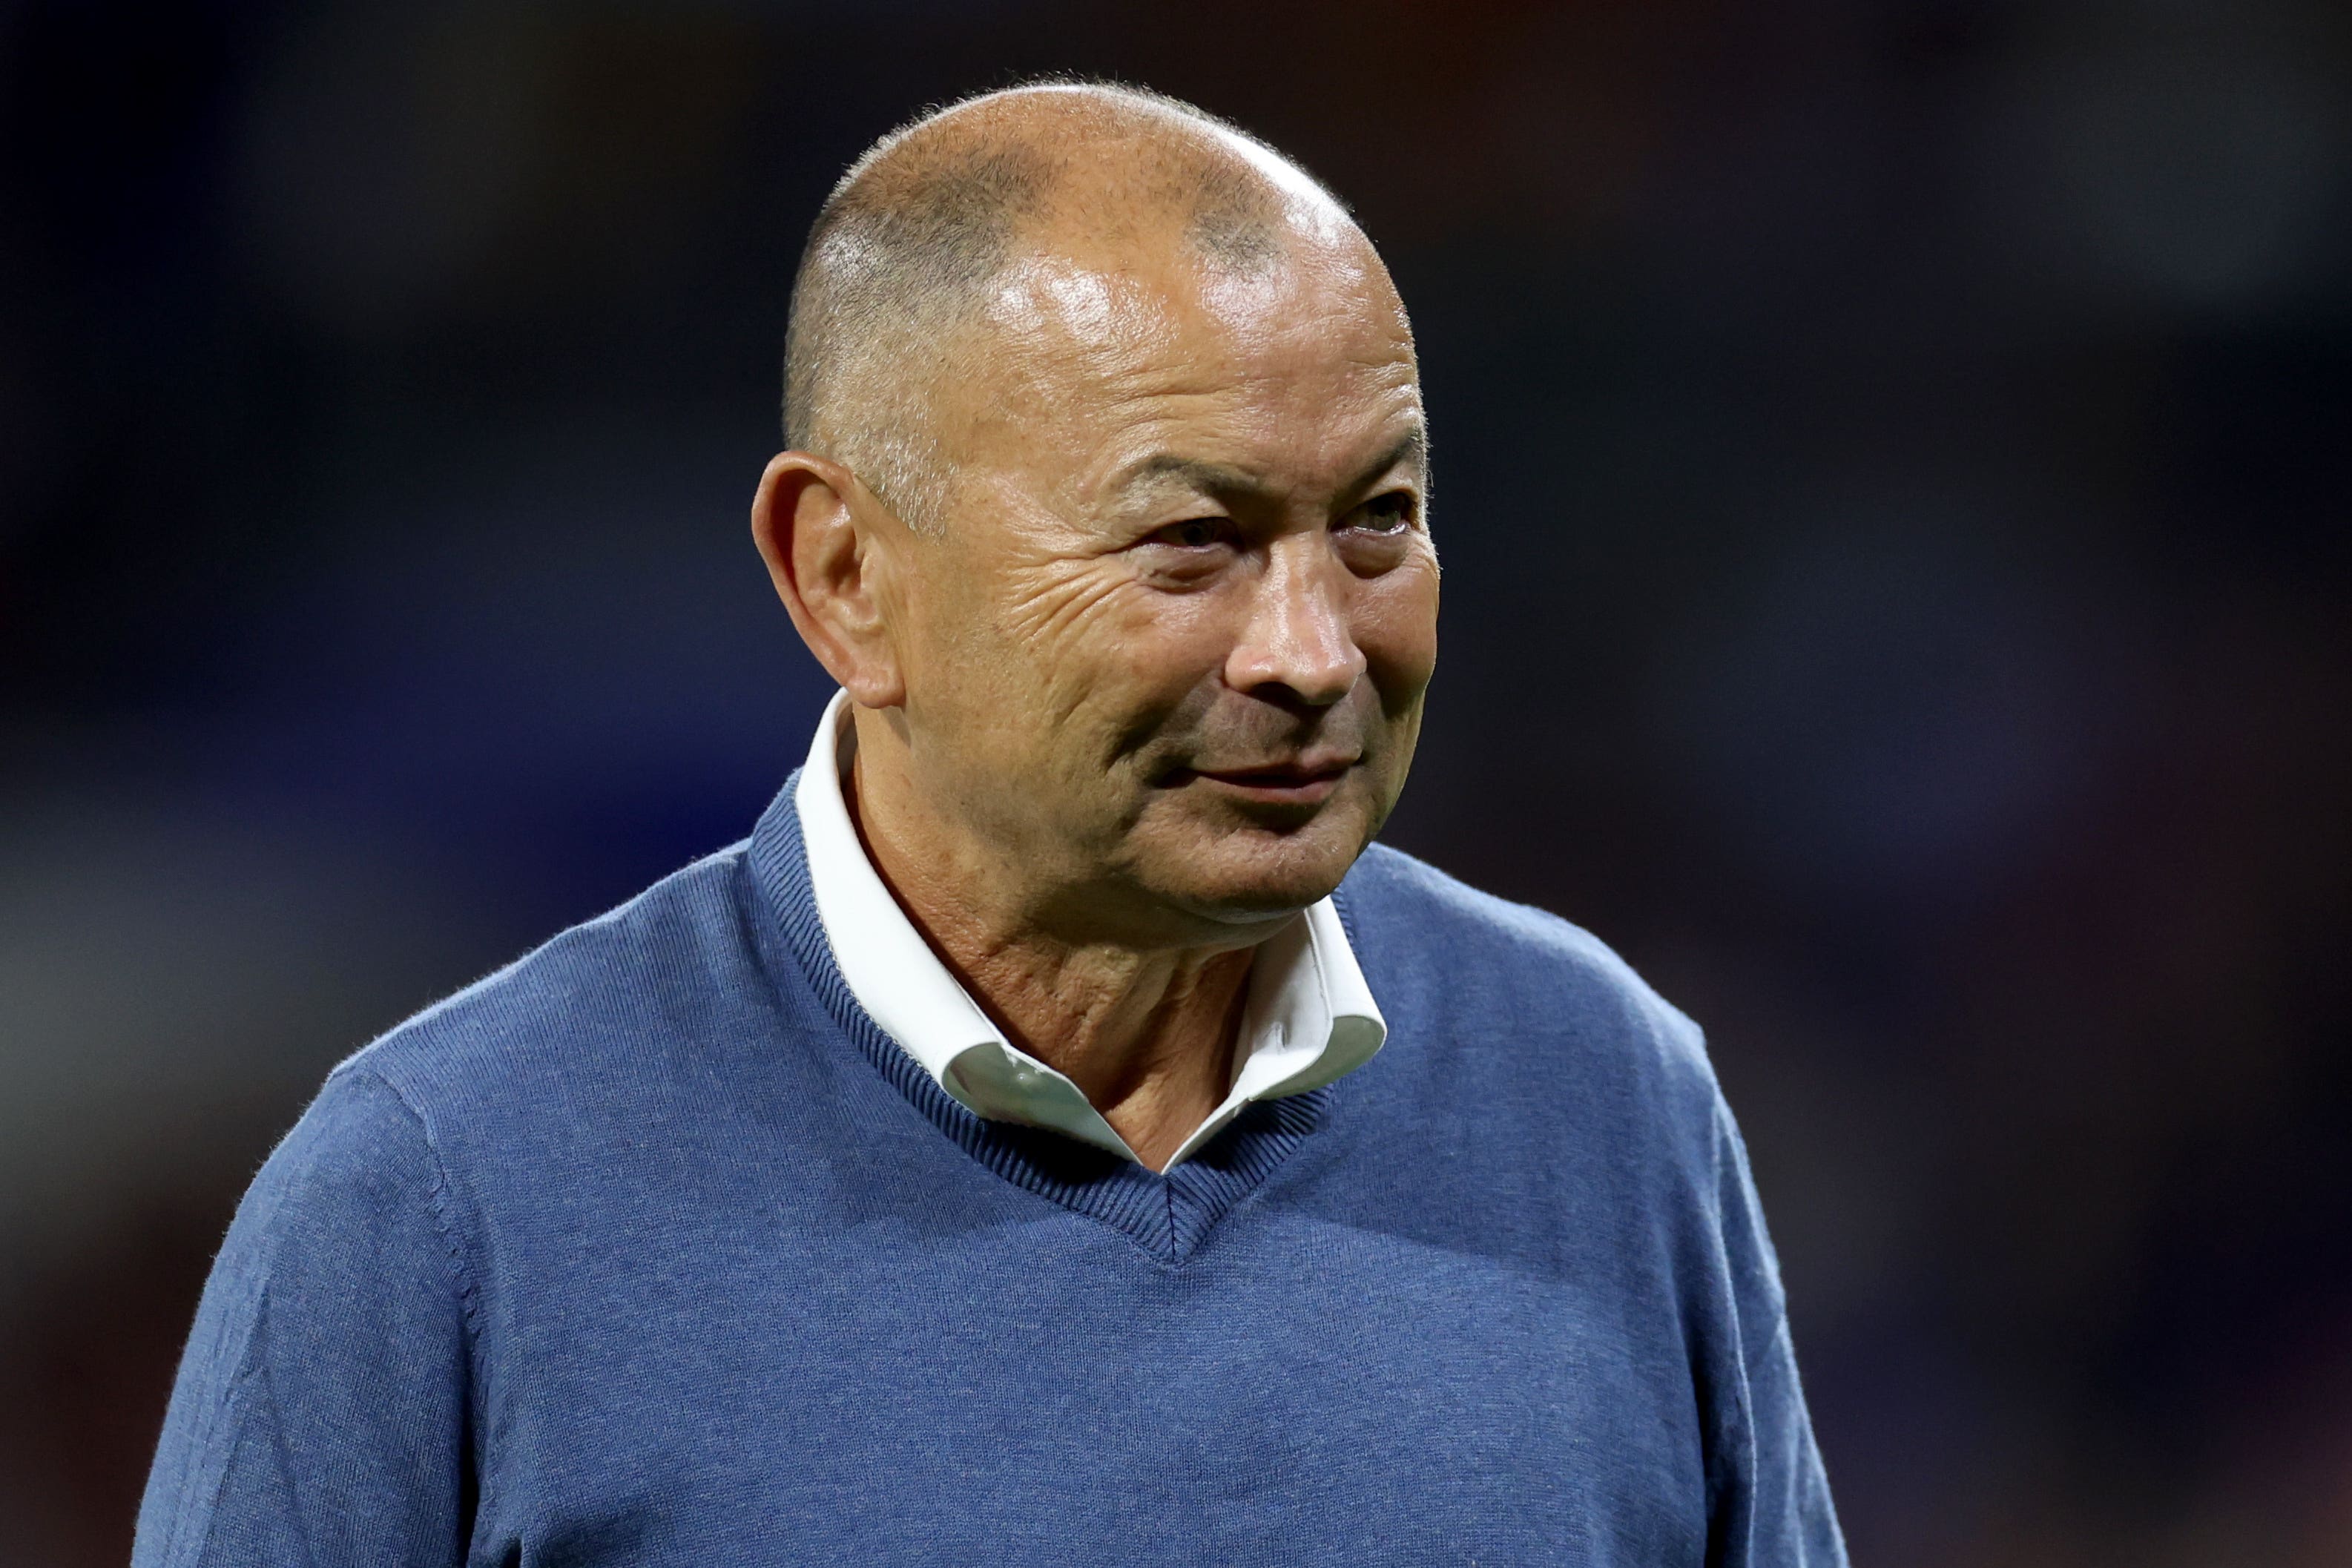 Wallaby coach Eddie Jones says he's committed to Australian rugby